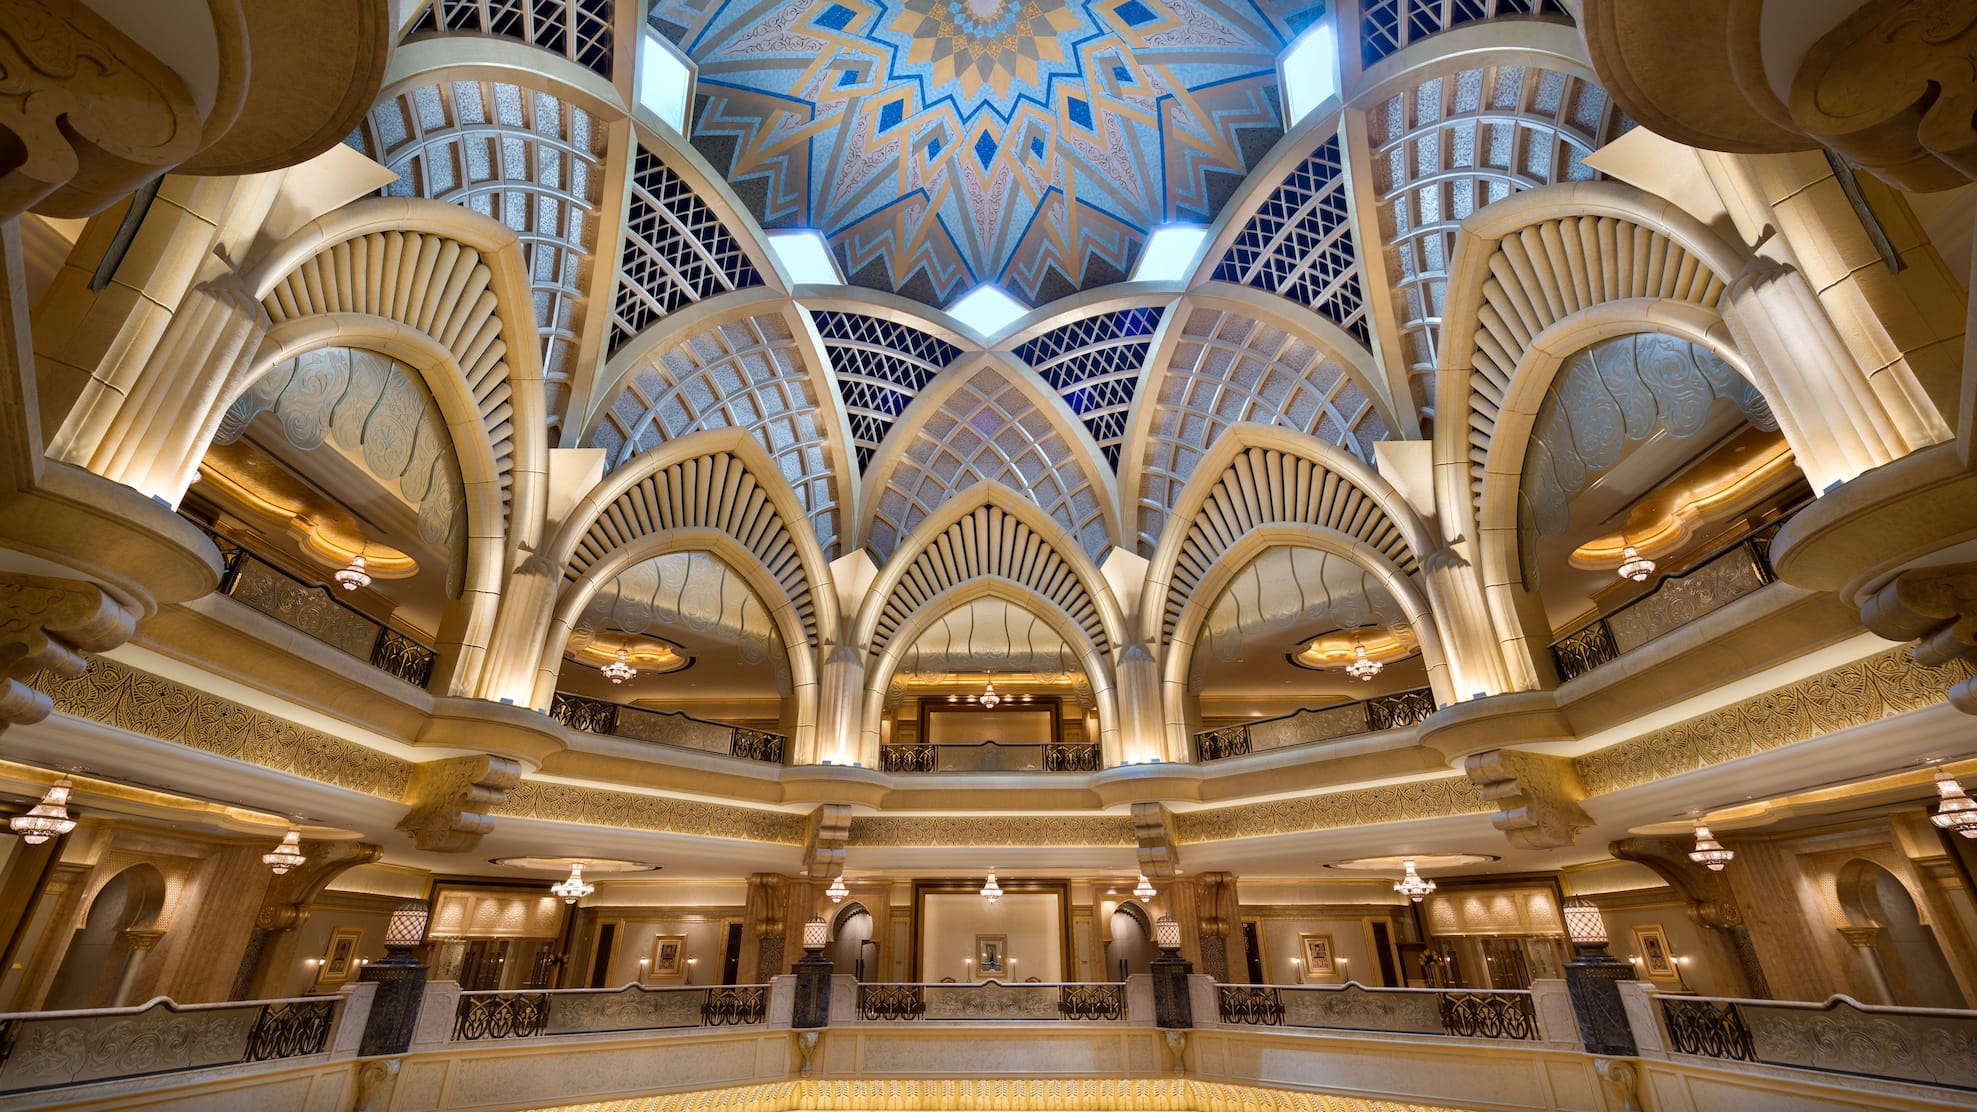 The Dome at Emirates Palace